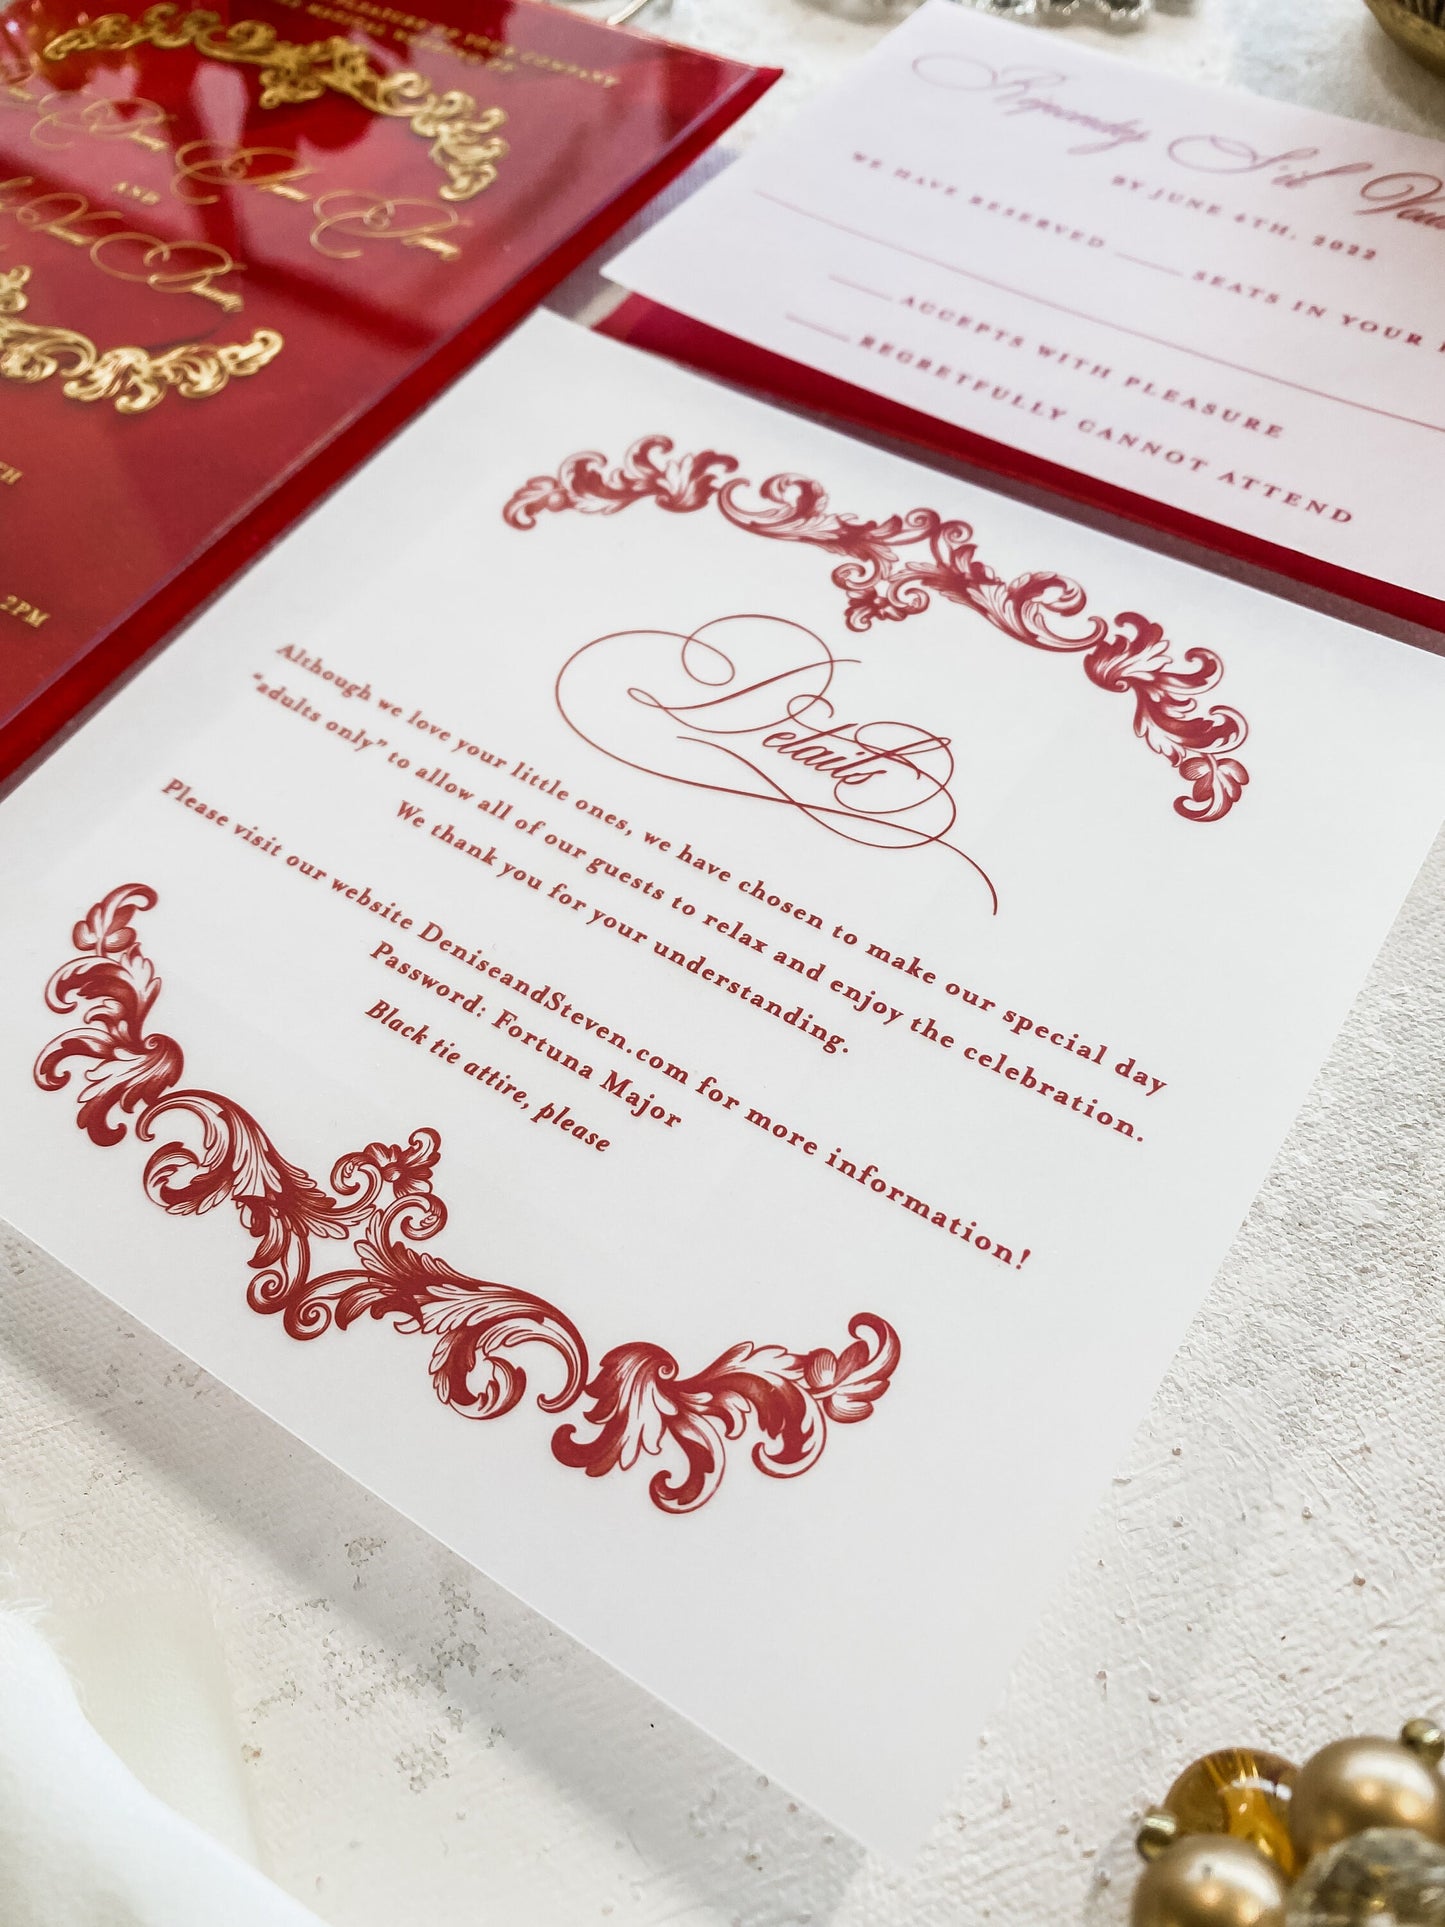 Red Wedding Invites | Acrylic Card |  Clear Invitations  | Wedding Invitations | Invitation Card | Elegant Invitations- Style 164 - Option 4